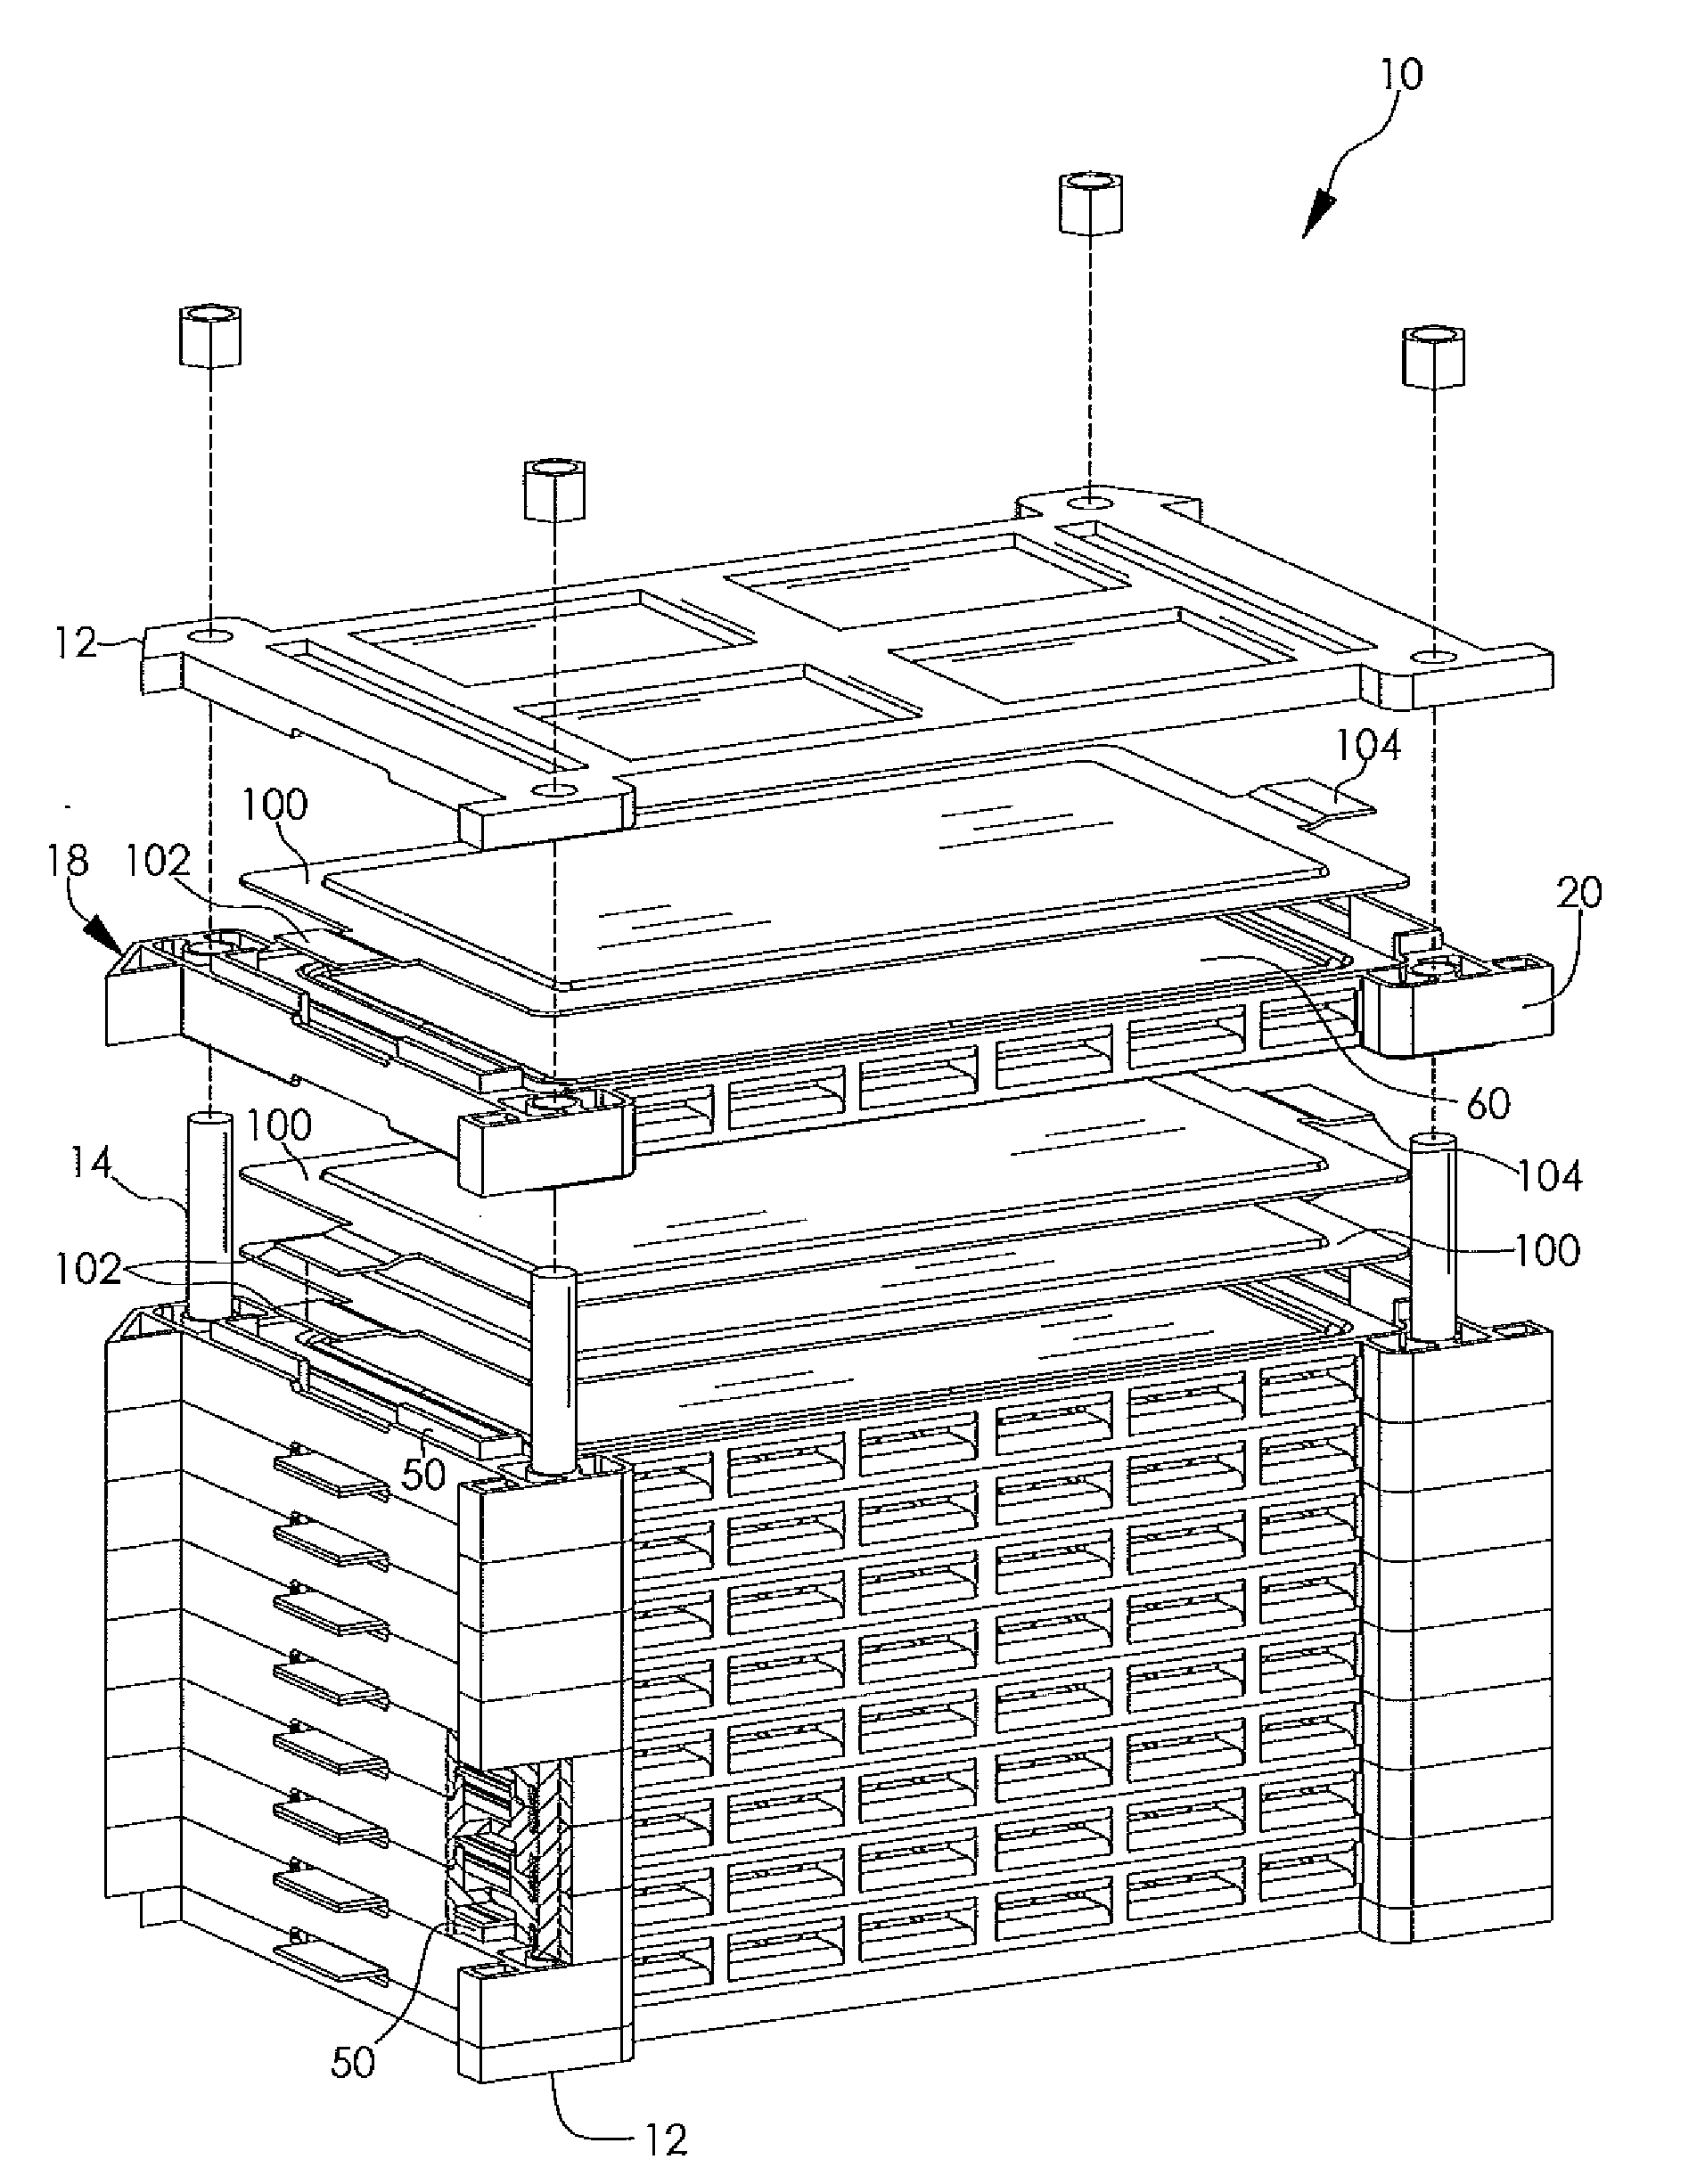 Corrugated fin and frame assembly for battery cooling